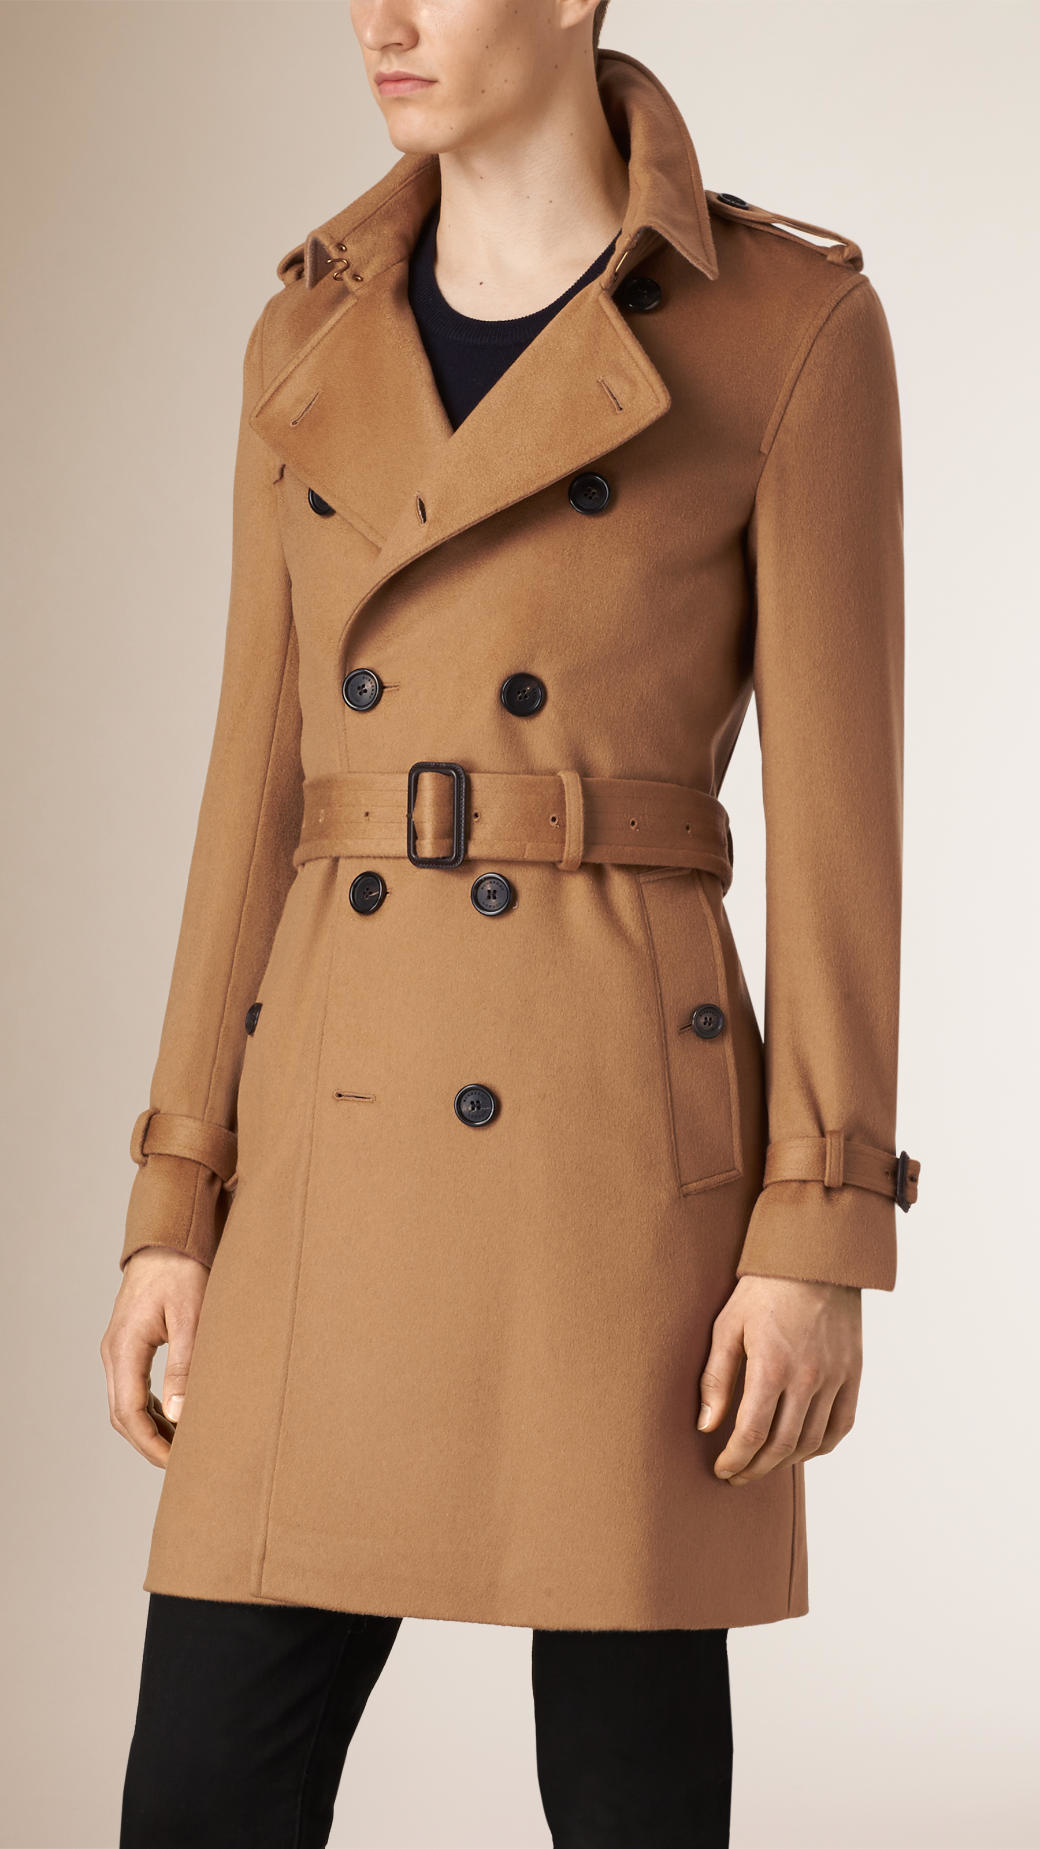 burberry trench coat cashmere - OFF-54% > Shipping free